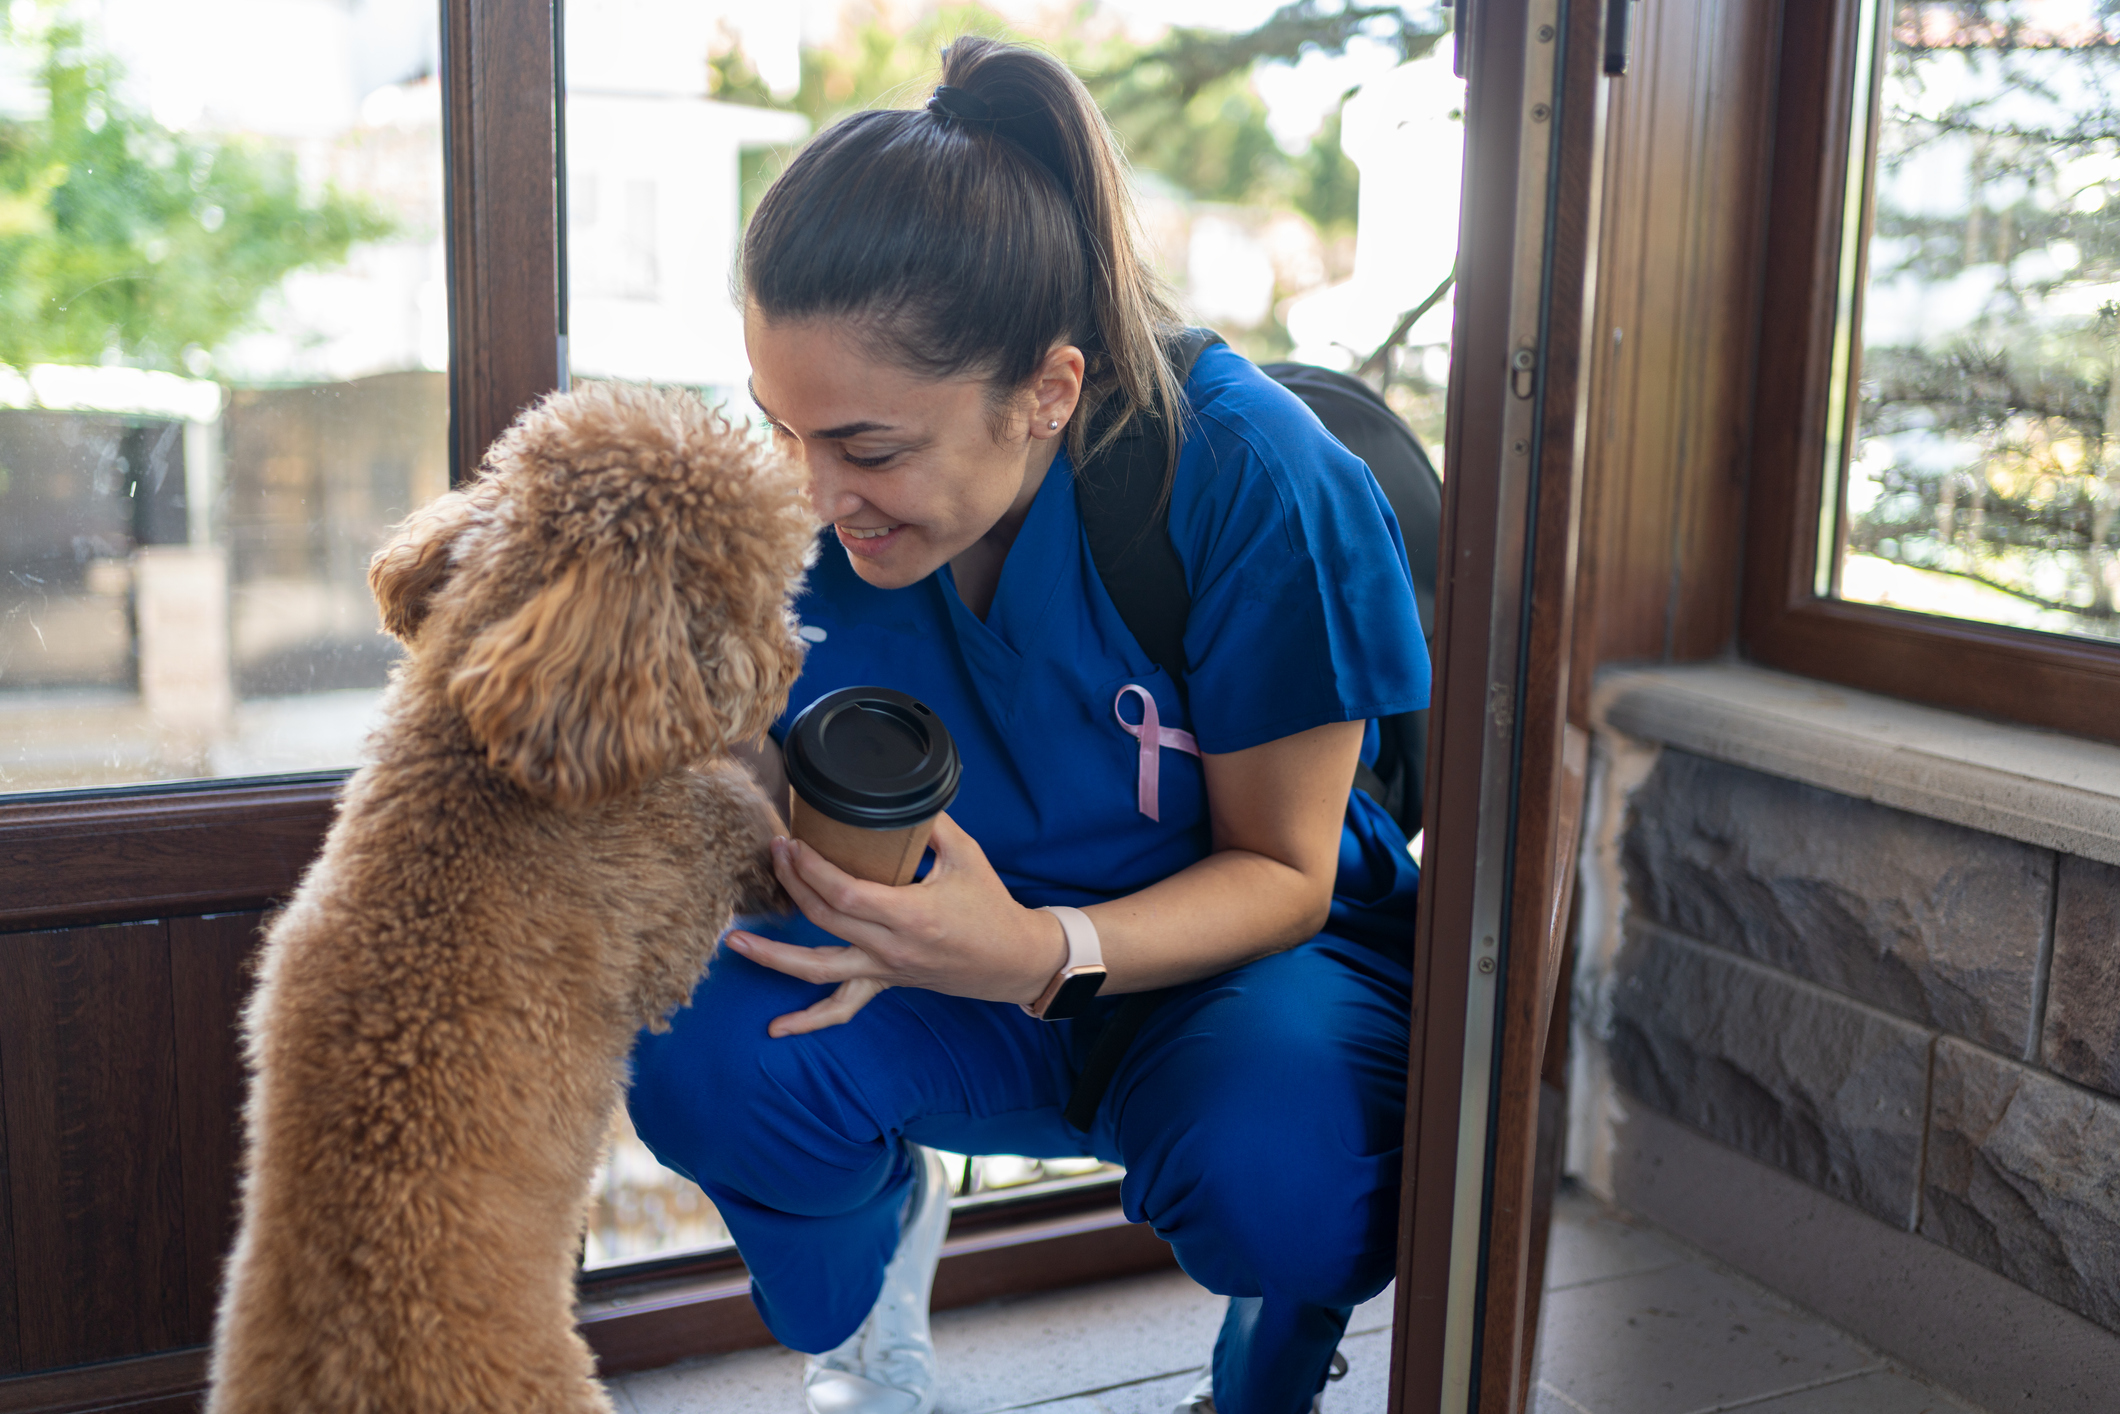 For Nurses Who Want to Improve Self-Care, Try Adopting a Pet: Study